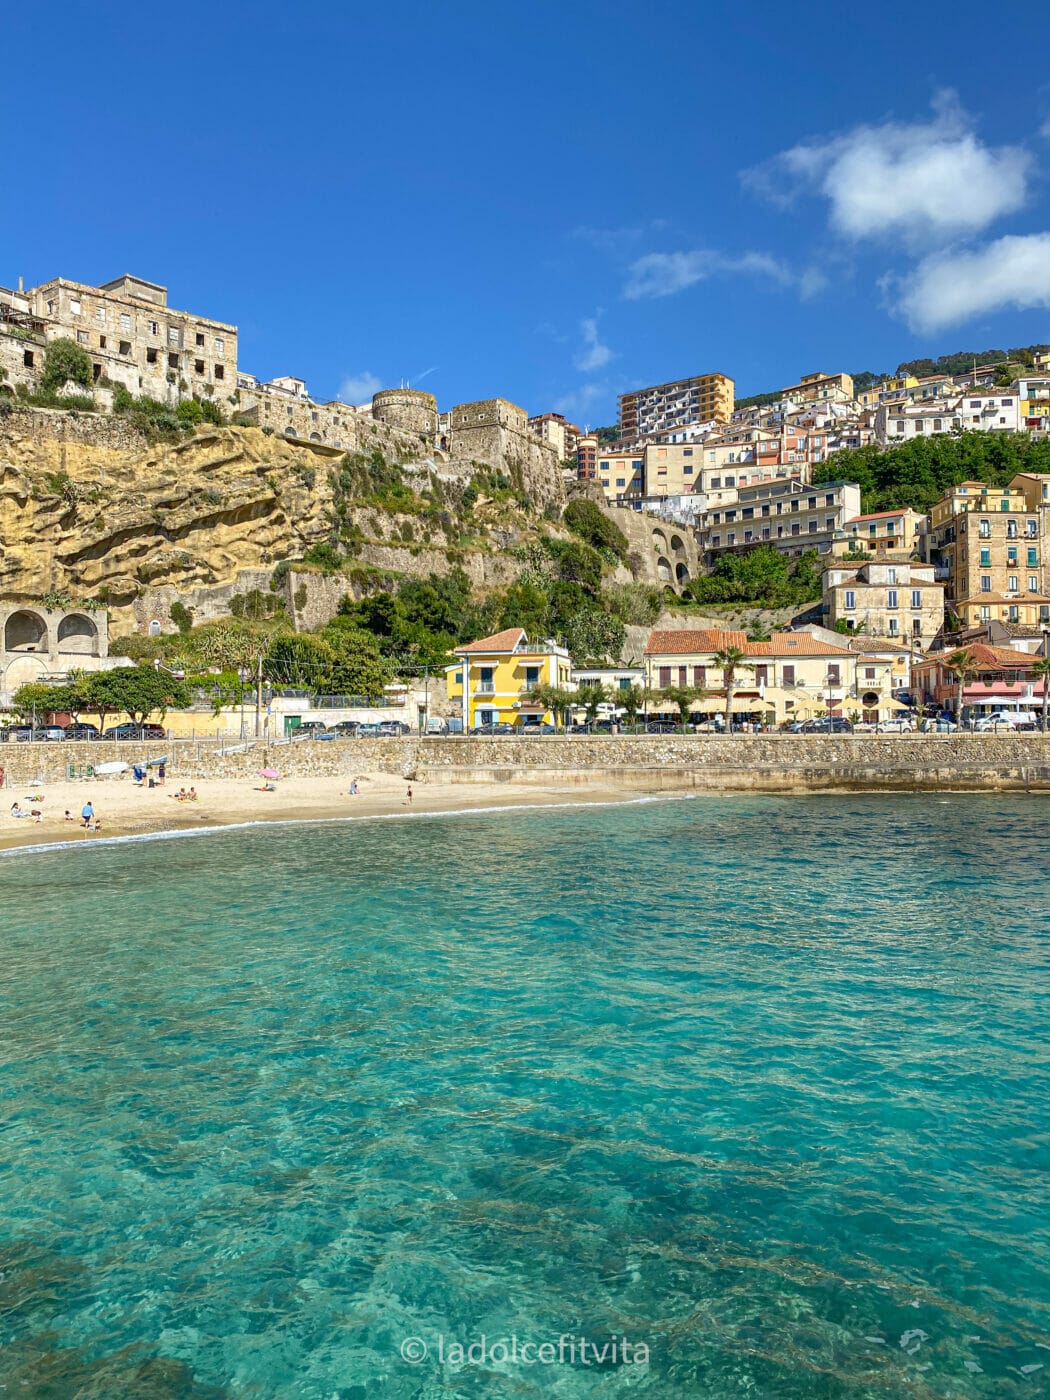 view of turquoise water and beach in seaside town Pizzo Calabria in Italy as seen from the marina